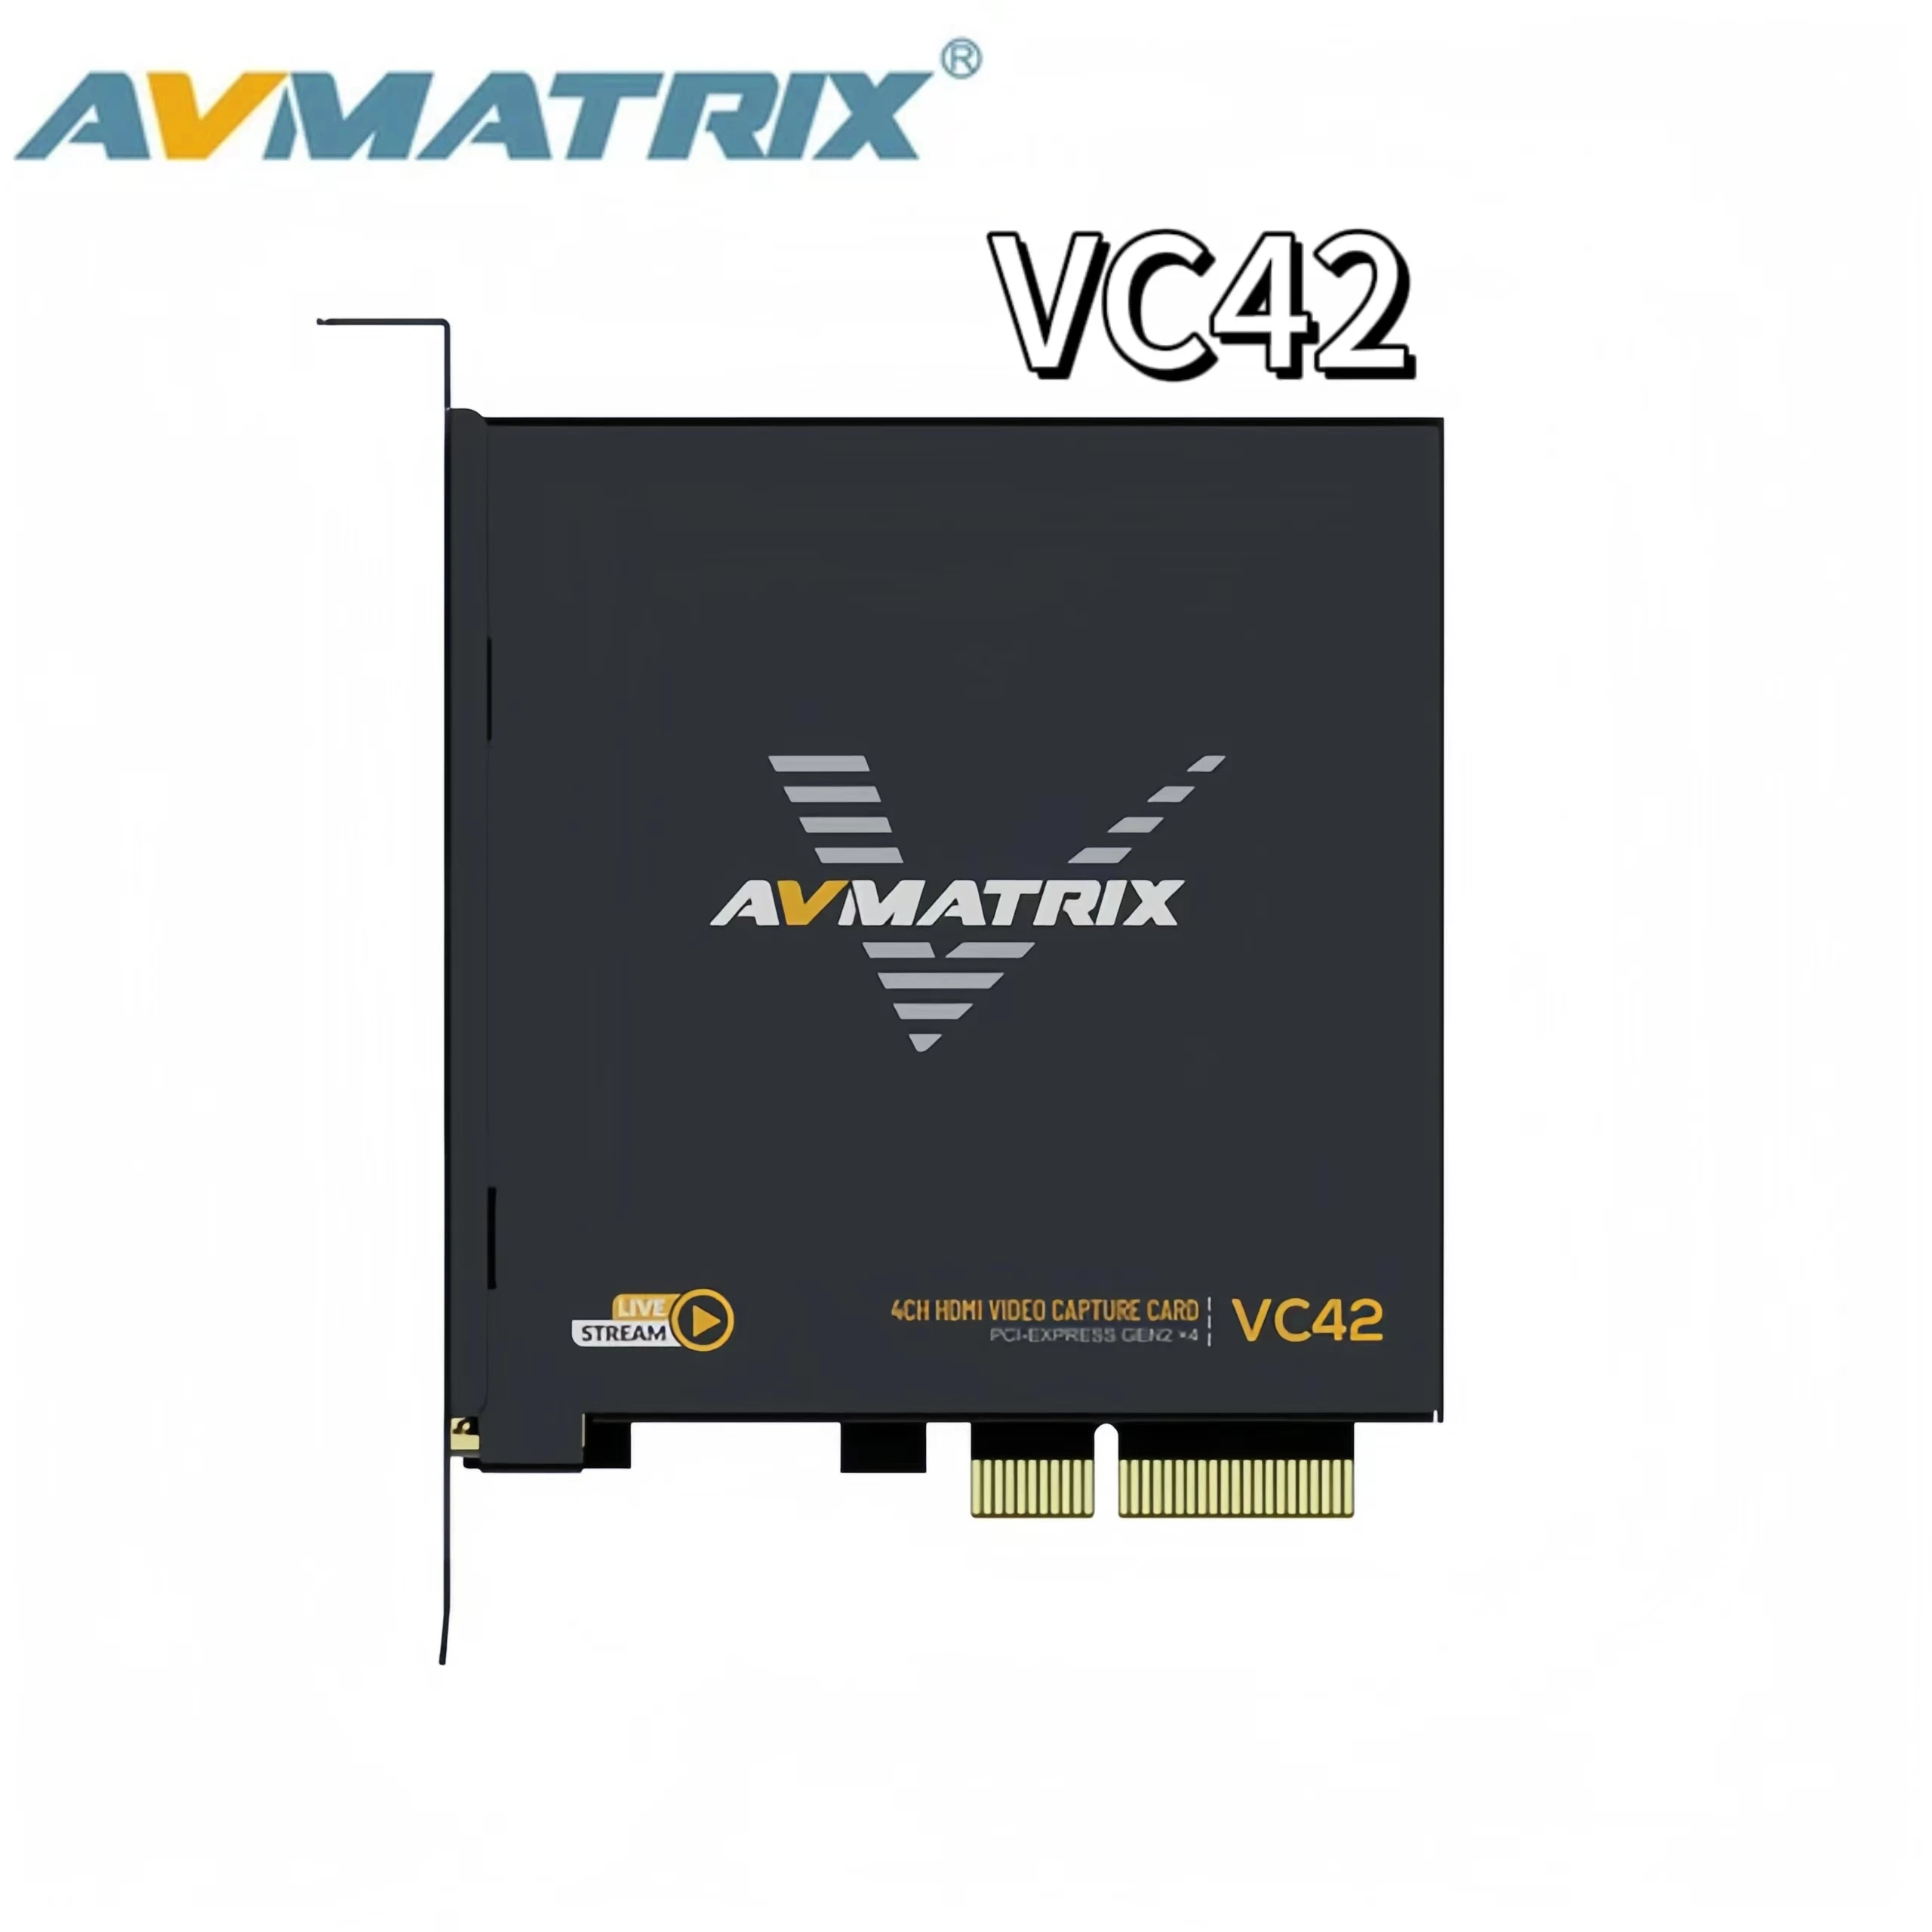 

AVMATRIX VC42 Uncompressed 4 Channel HDMI PCIE Video Capture Card for OBS/Potplayer/XSplit/vMix Live Streaming